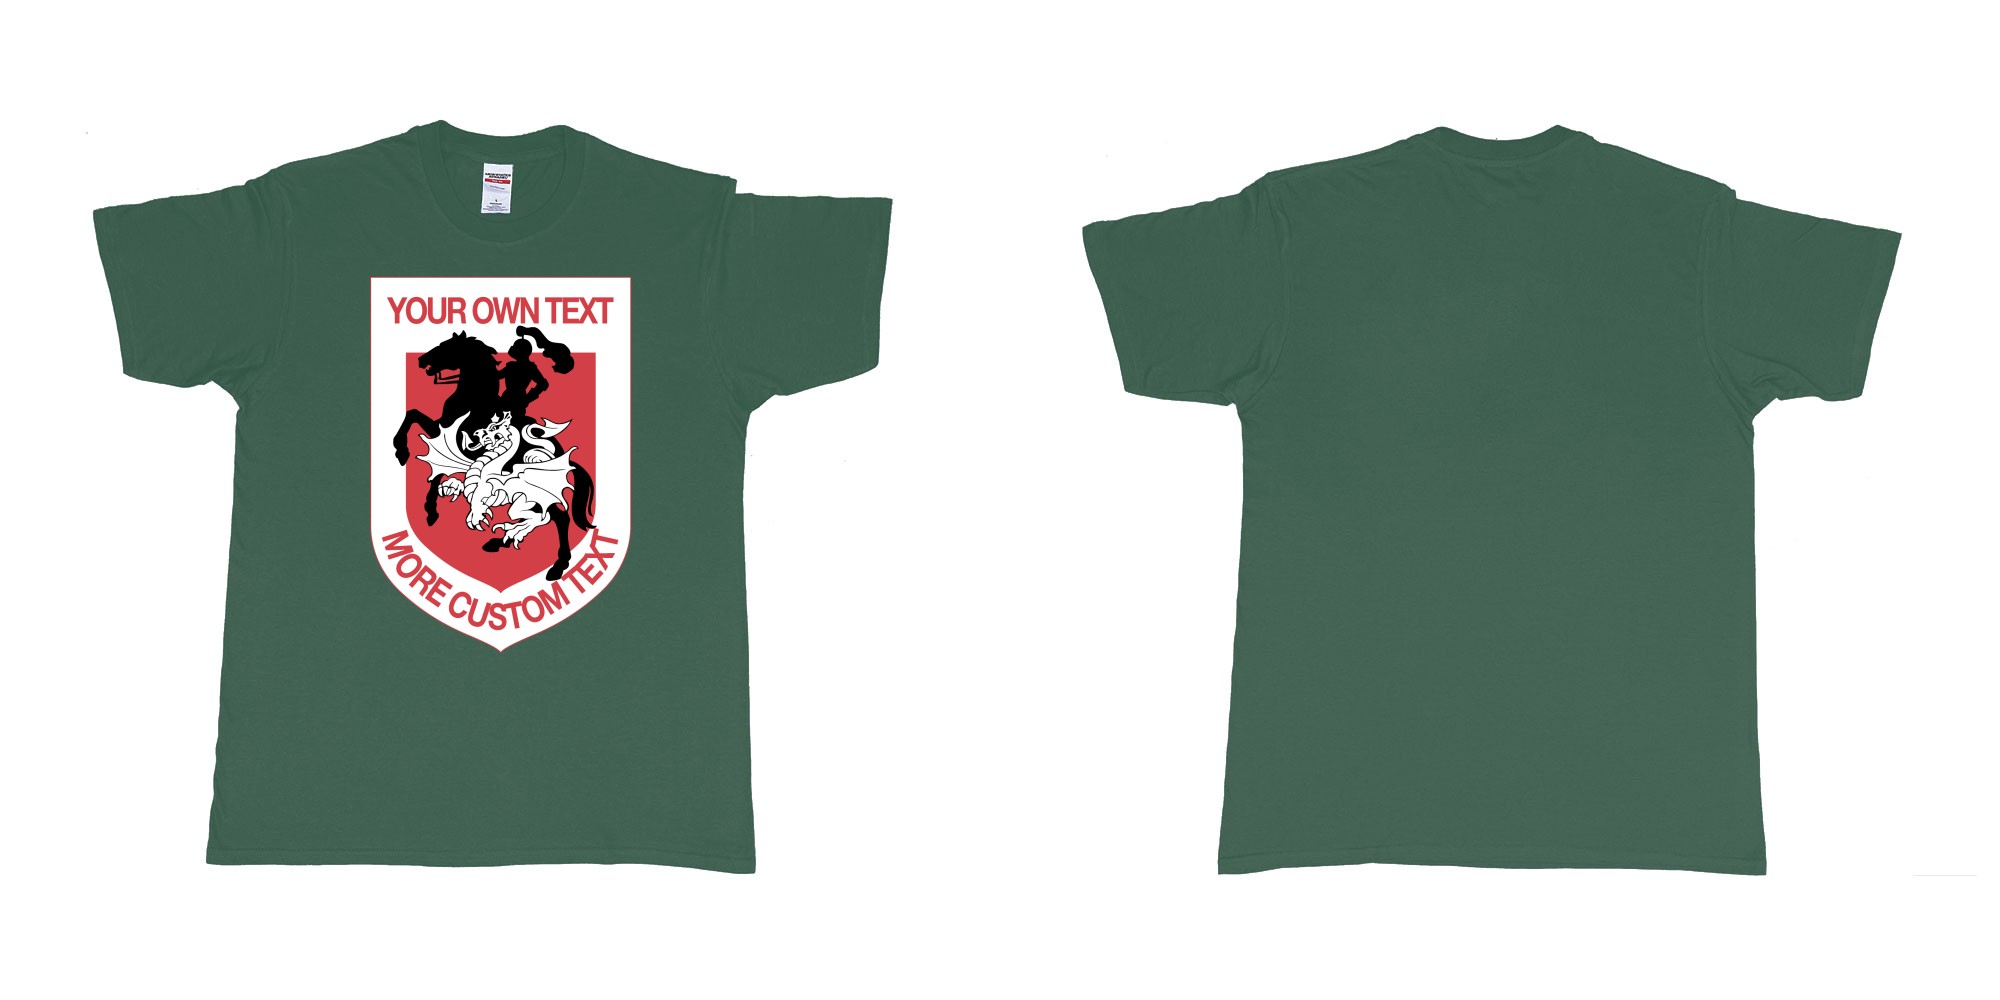 Custom tshirt design st george illawarra dragons custom design in fabric color forest-green choice your own text made in Bali by The Pirate Way